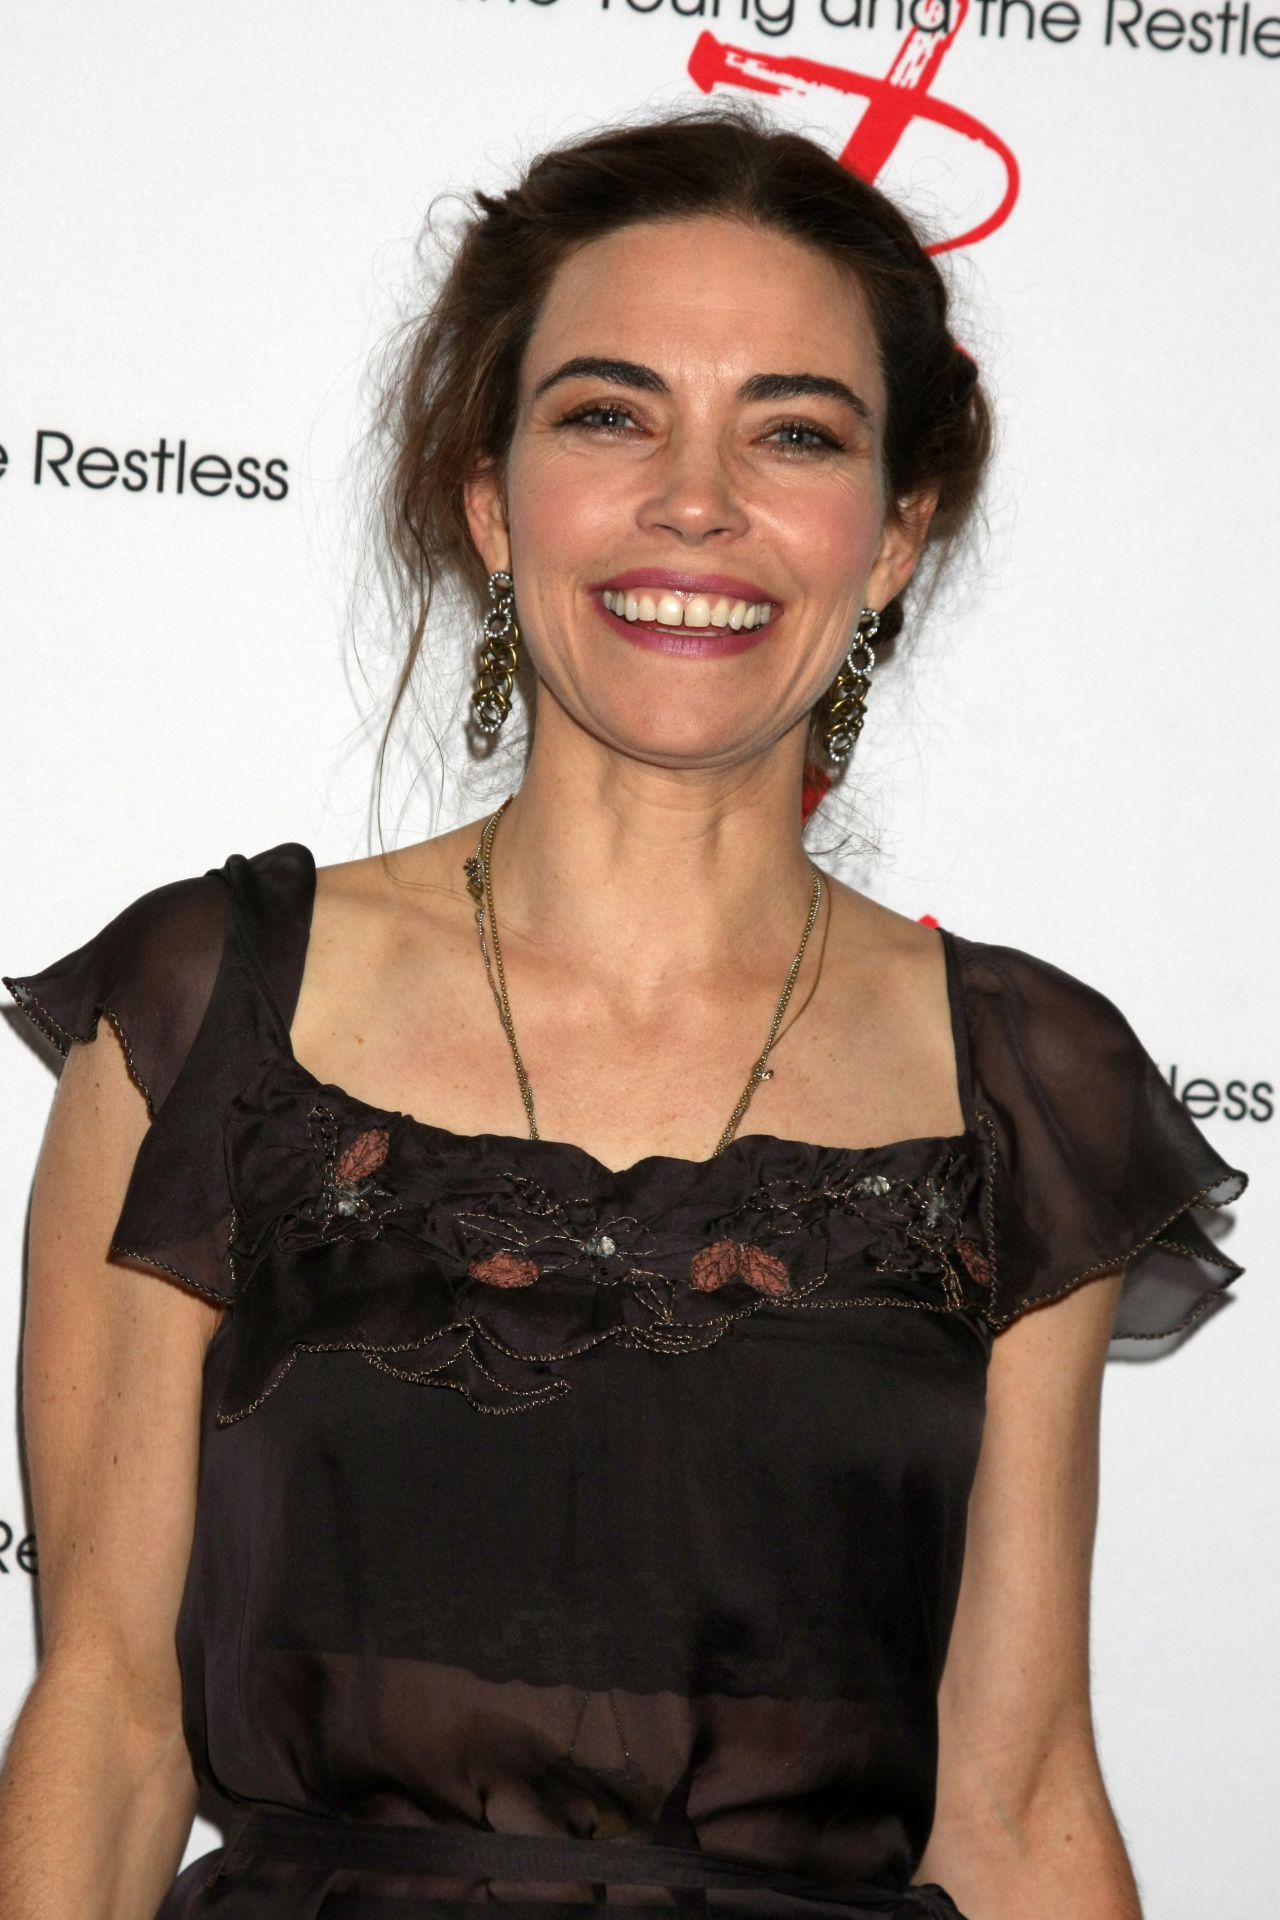 Amelia Heinle - Young and Restless Fan Event 2017 in Burbank.